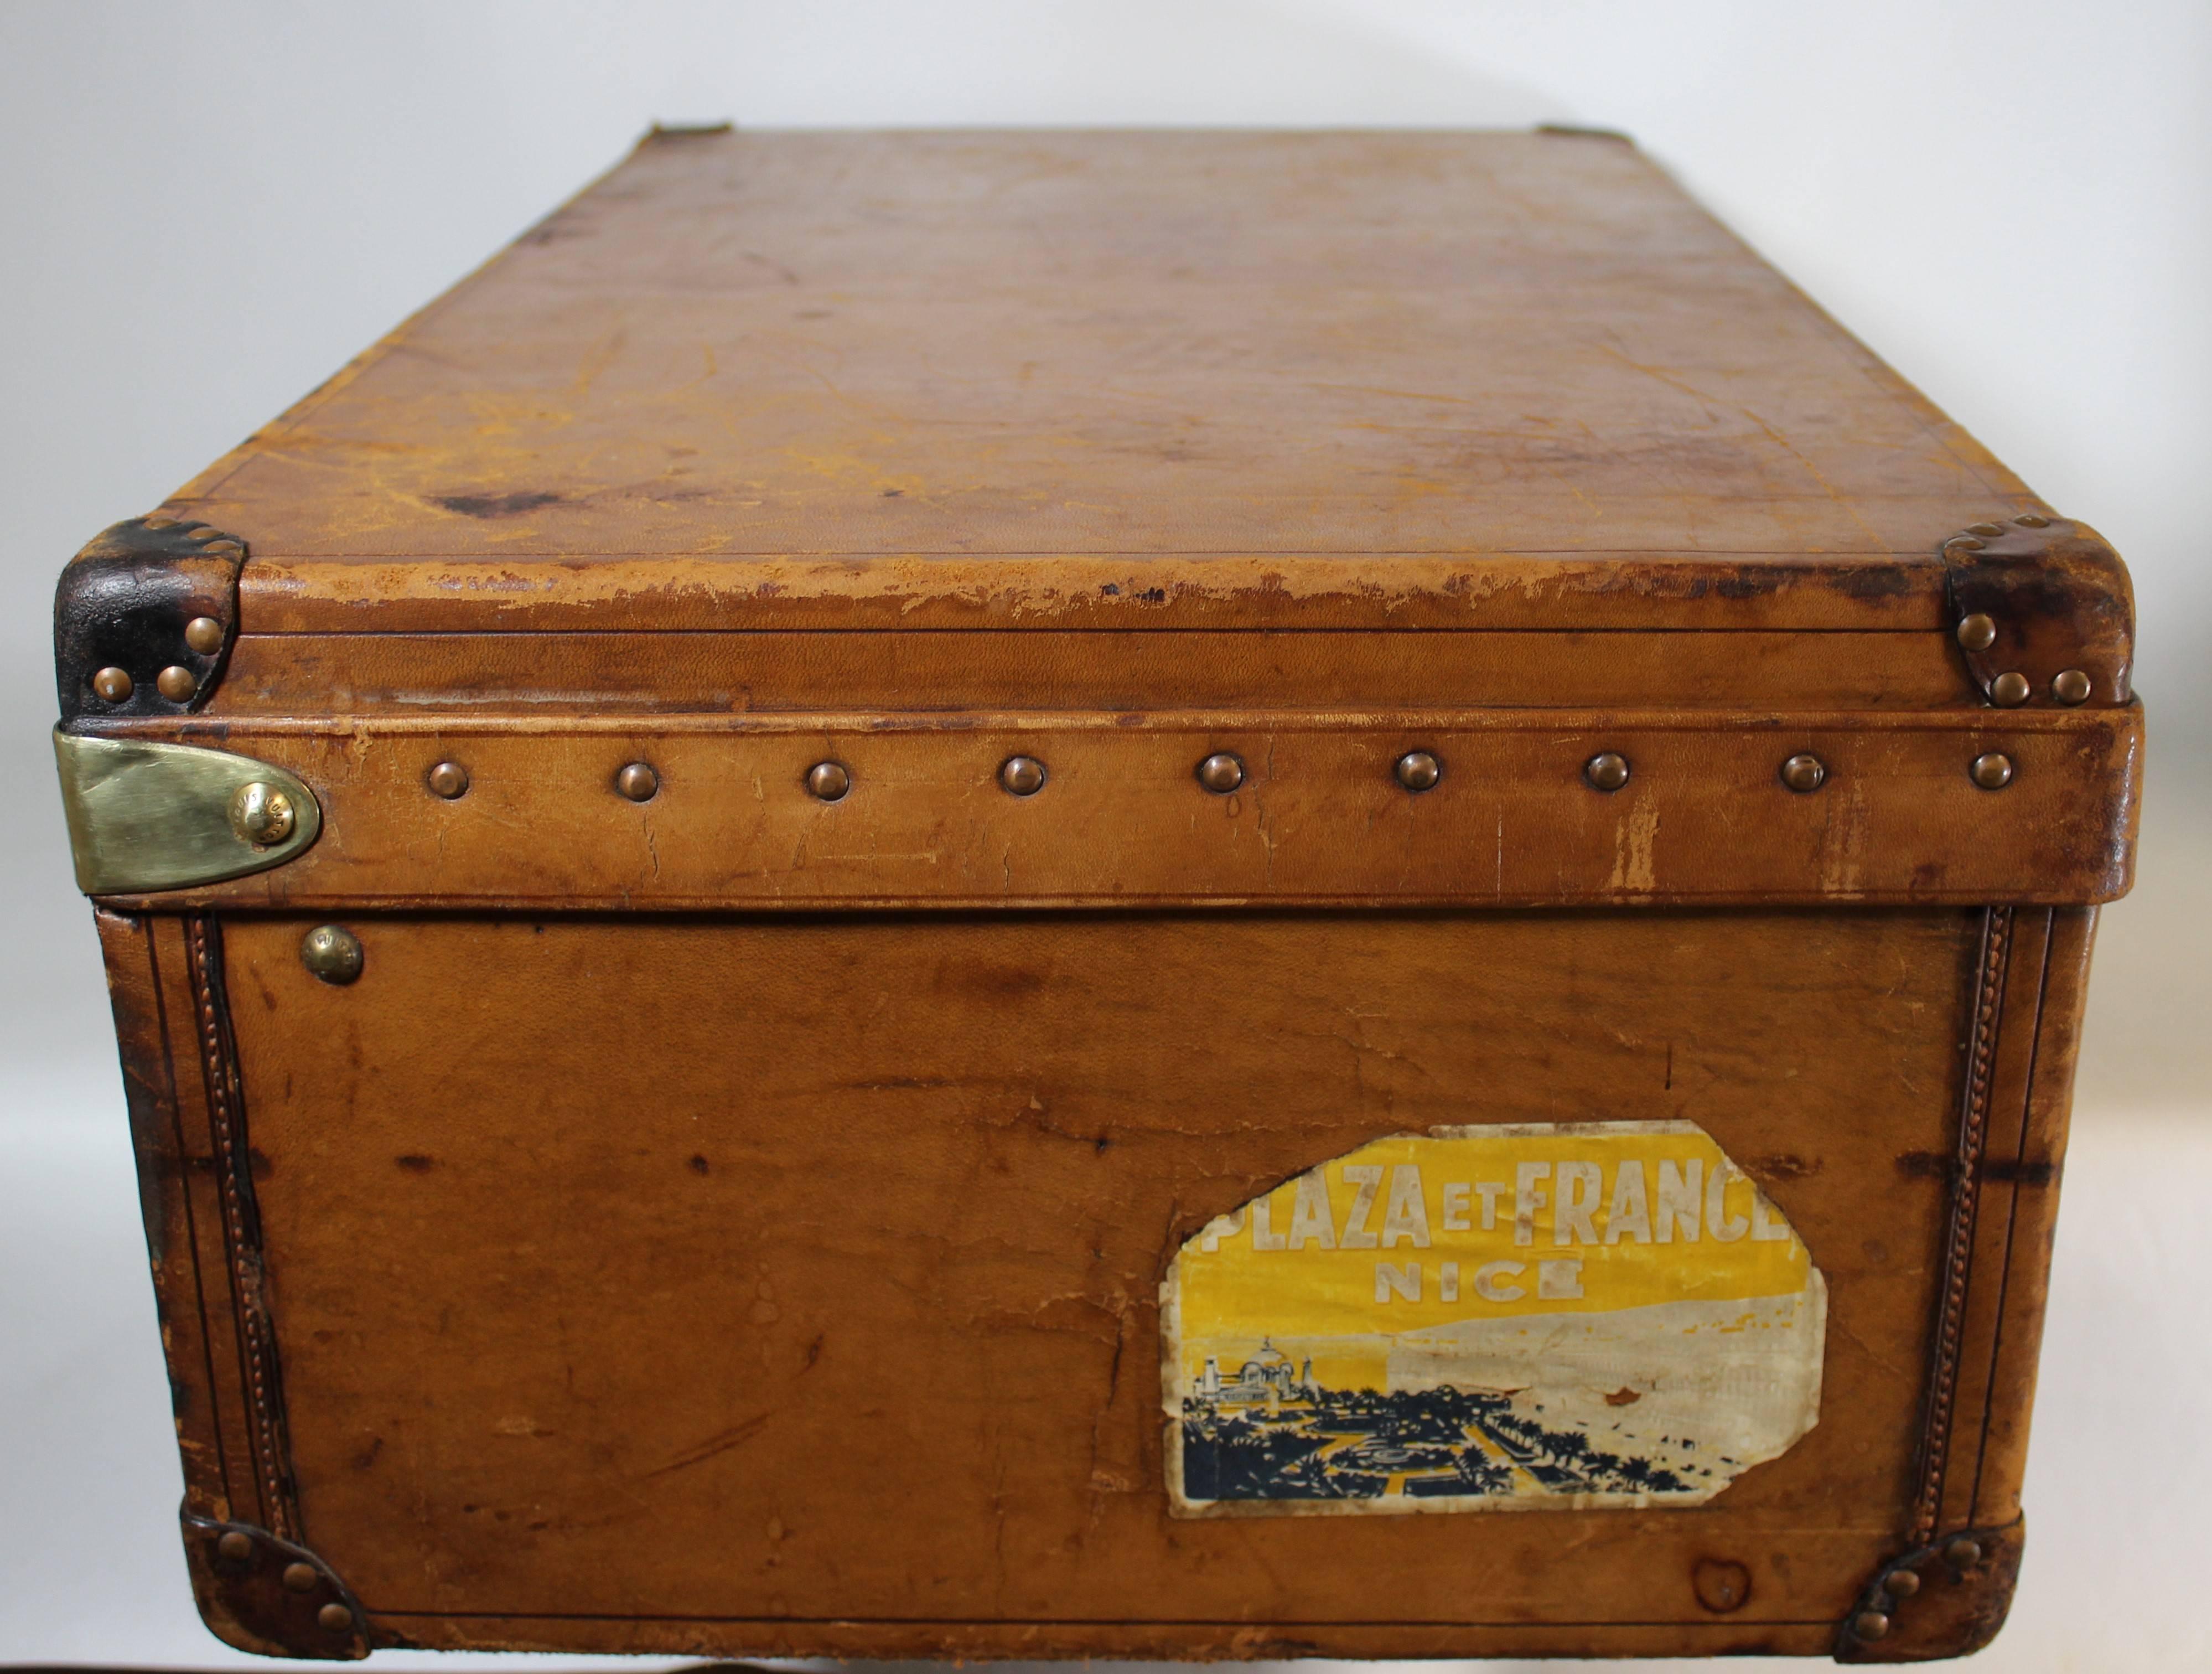 This authentic Louis Vuitton cabin trunk from the turn of the century is done in calf's leather which has developed a beautiful warm and weathered patina over time. What's remarkable about this piece is the fact that it comes in completely original,